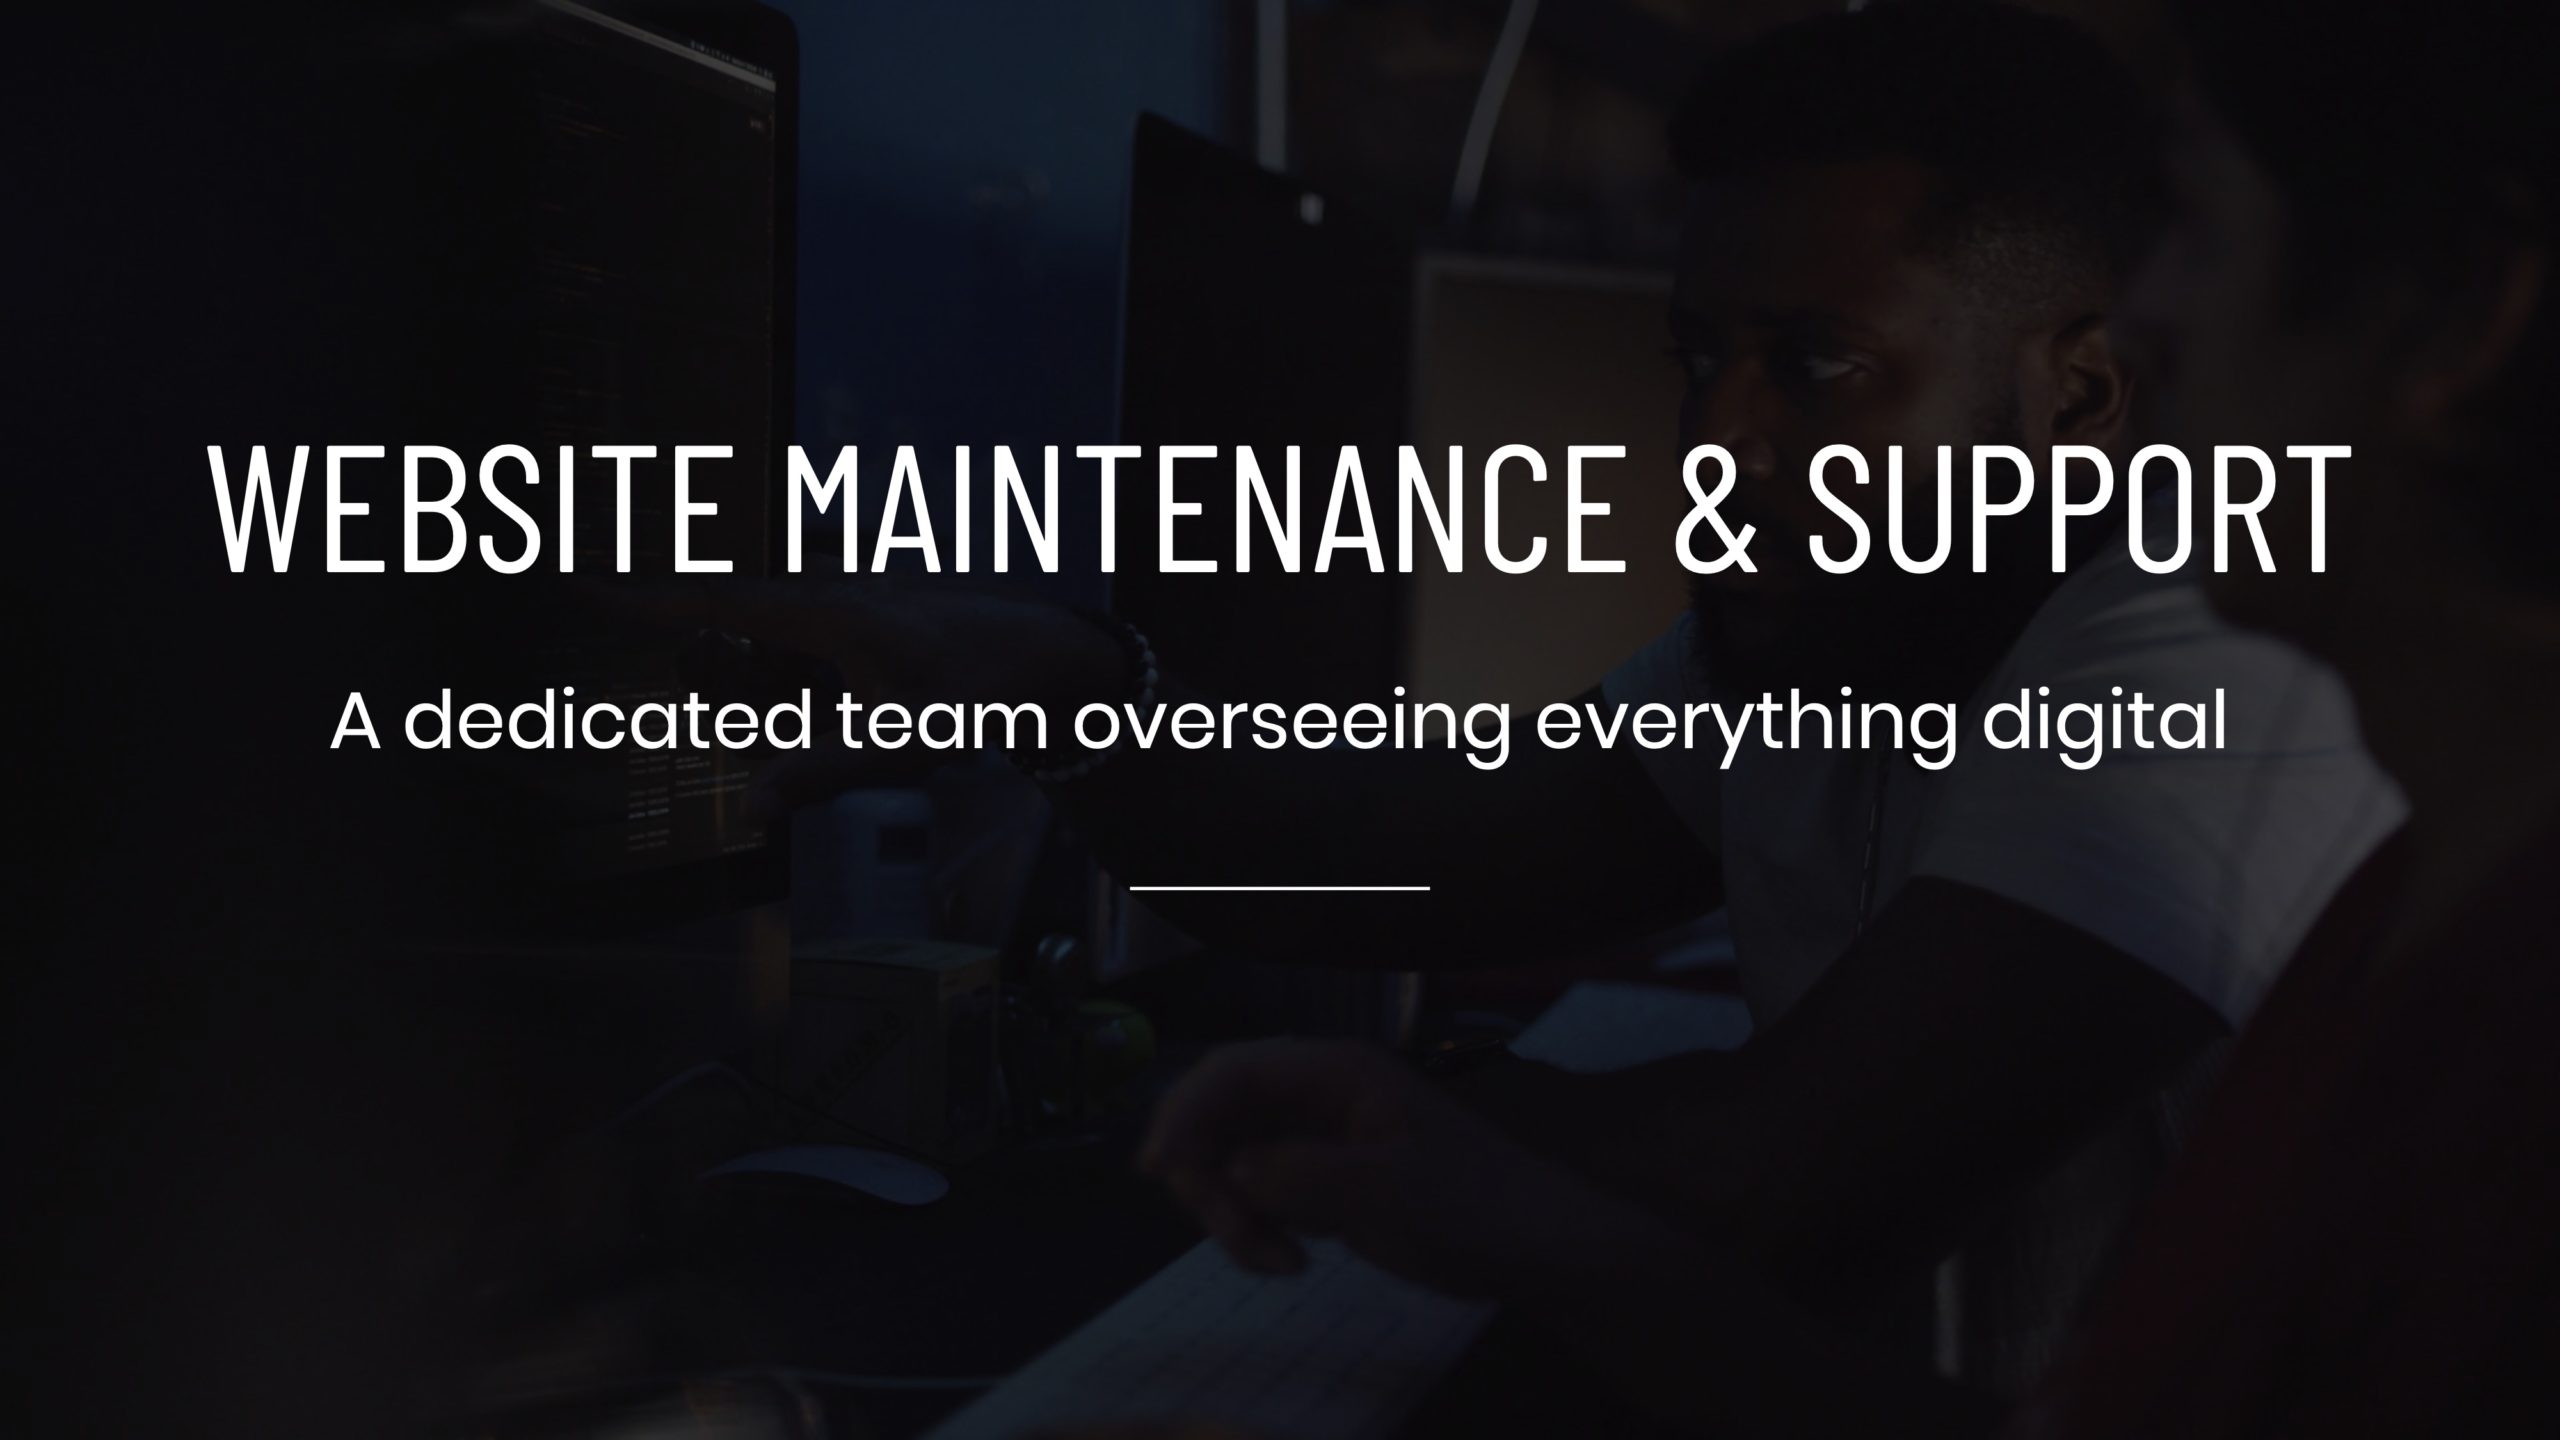 White Website Maintenance and Support A dedicated team overseeing everything digital title Services by C&I Studios Tile on dimmed background side profile of man working o a desktop